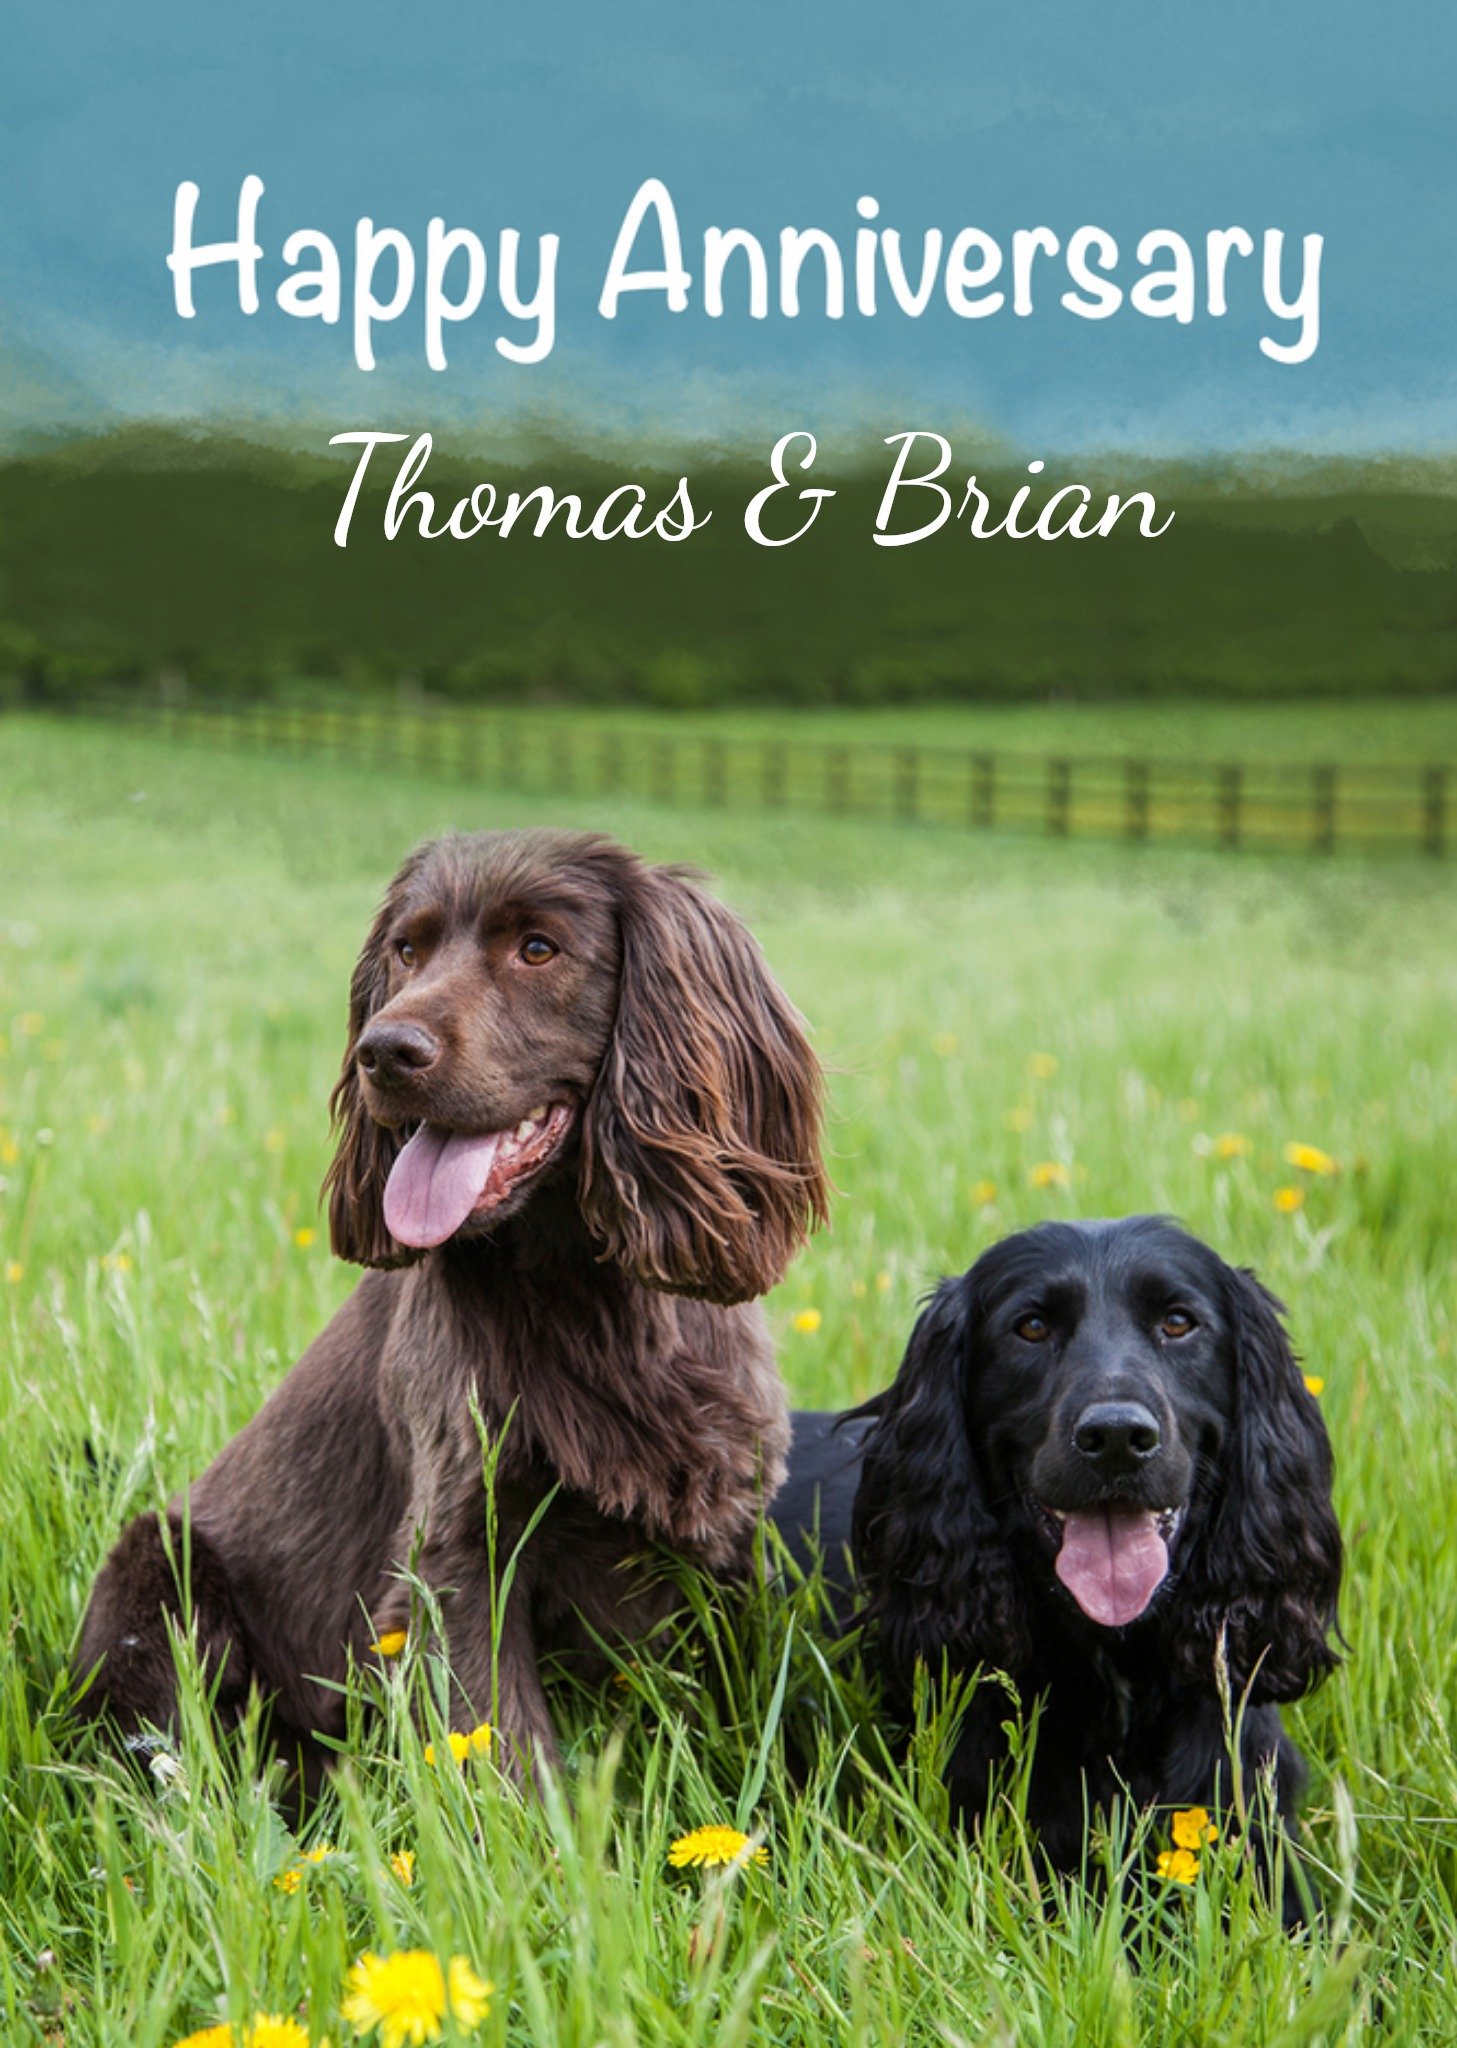 Moonpig Alex Sharp Photography Spaniel Dogs In The Grass Anniversary Card, Large